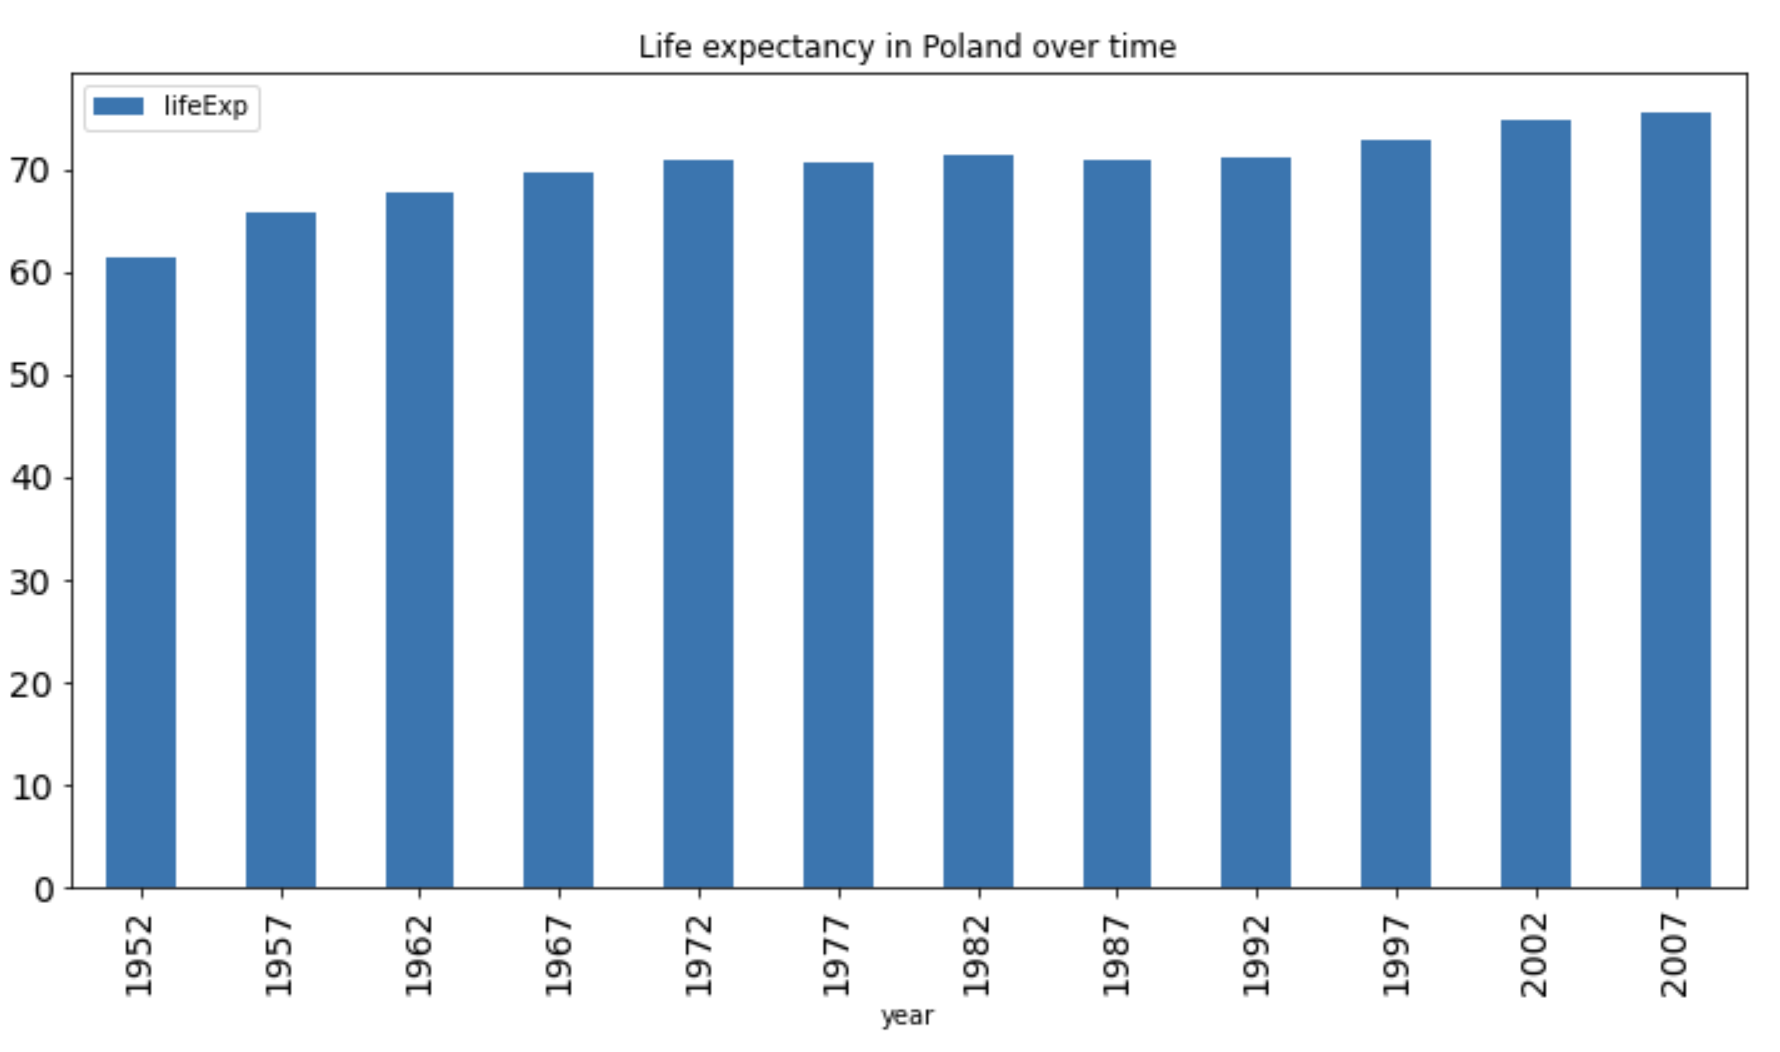 Image 20 - Life expectancy in Poland as a bar chart